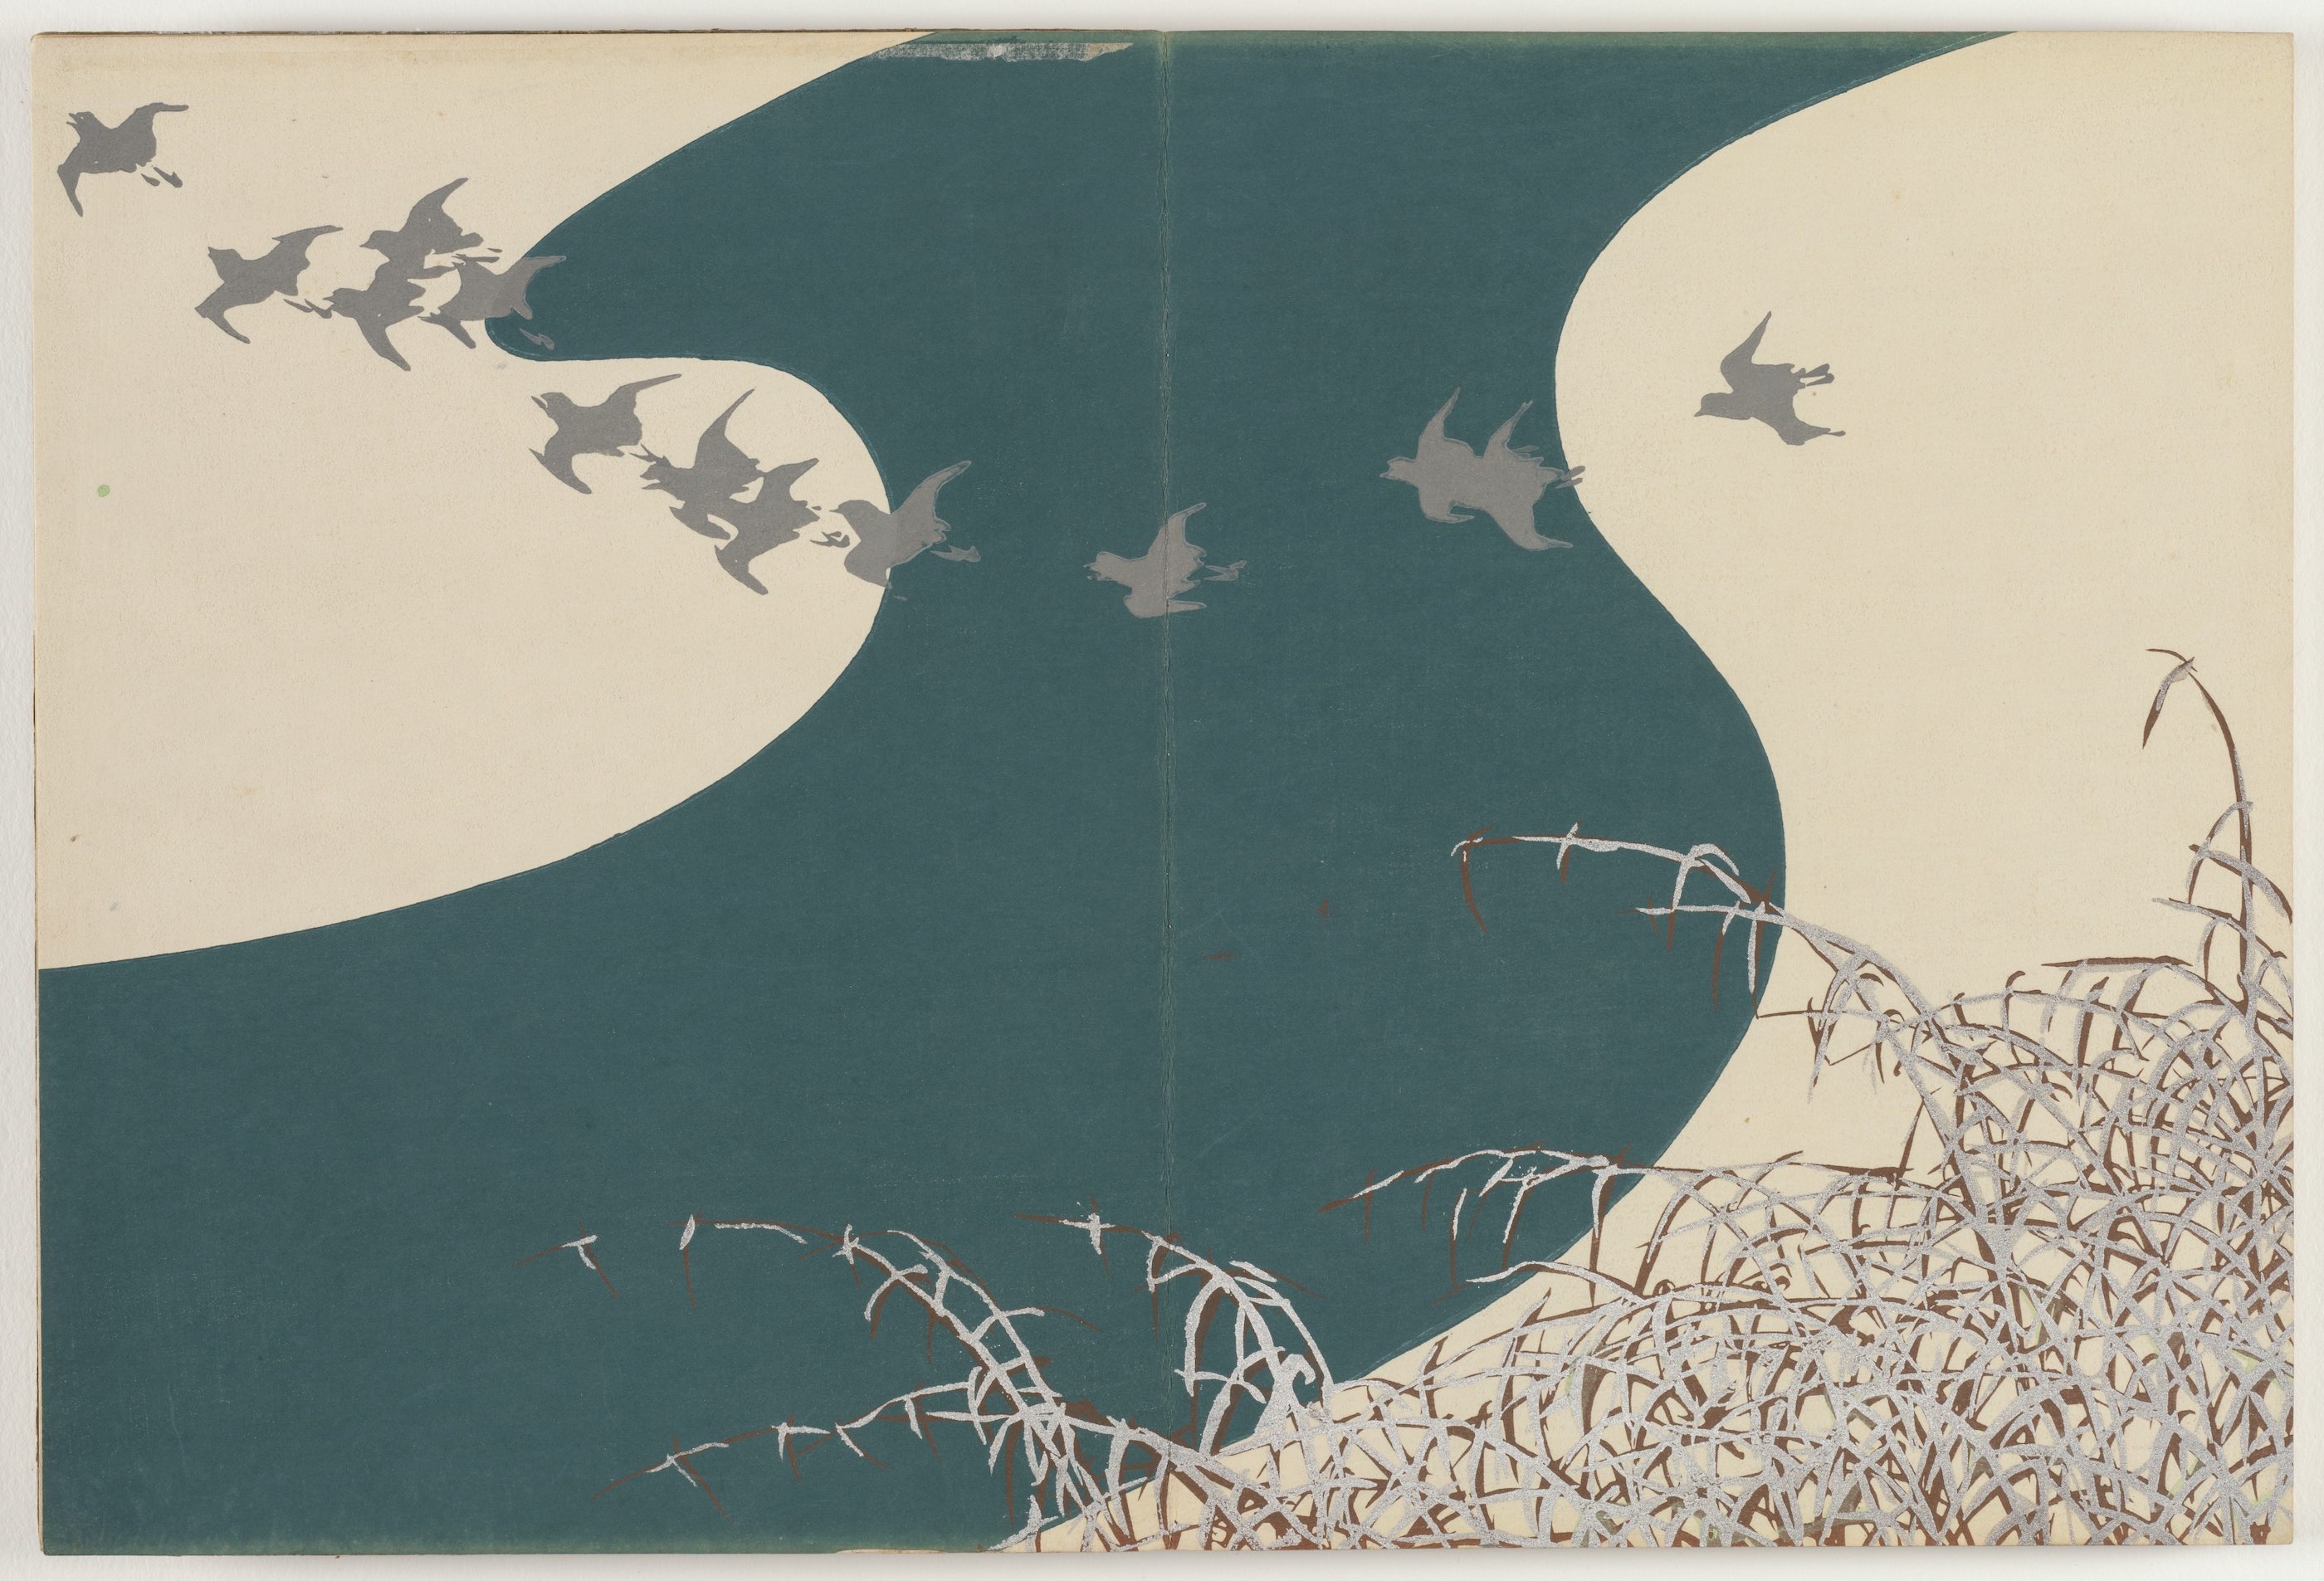 Flowers of a Hundred Worlds: River in Winter by Kamisaka Sekka - 1909–10 - 29.9 x 22.1 cm Cleveland Museum of Art